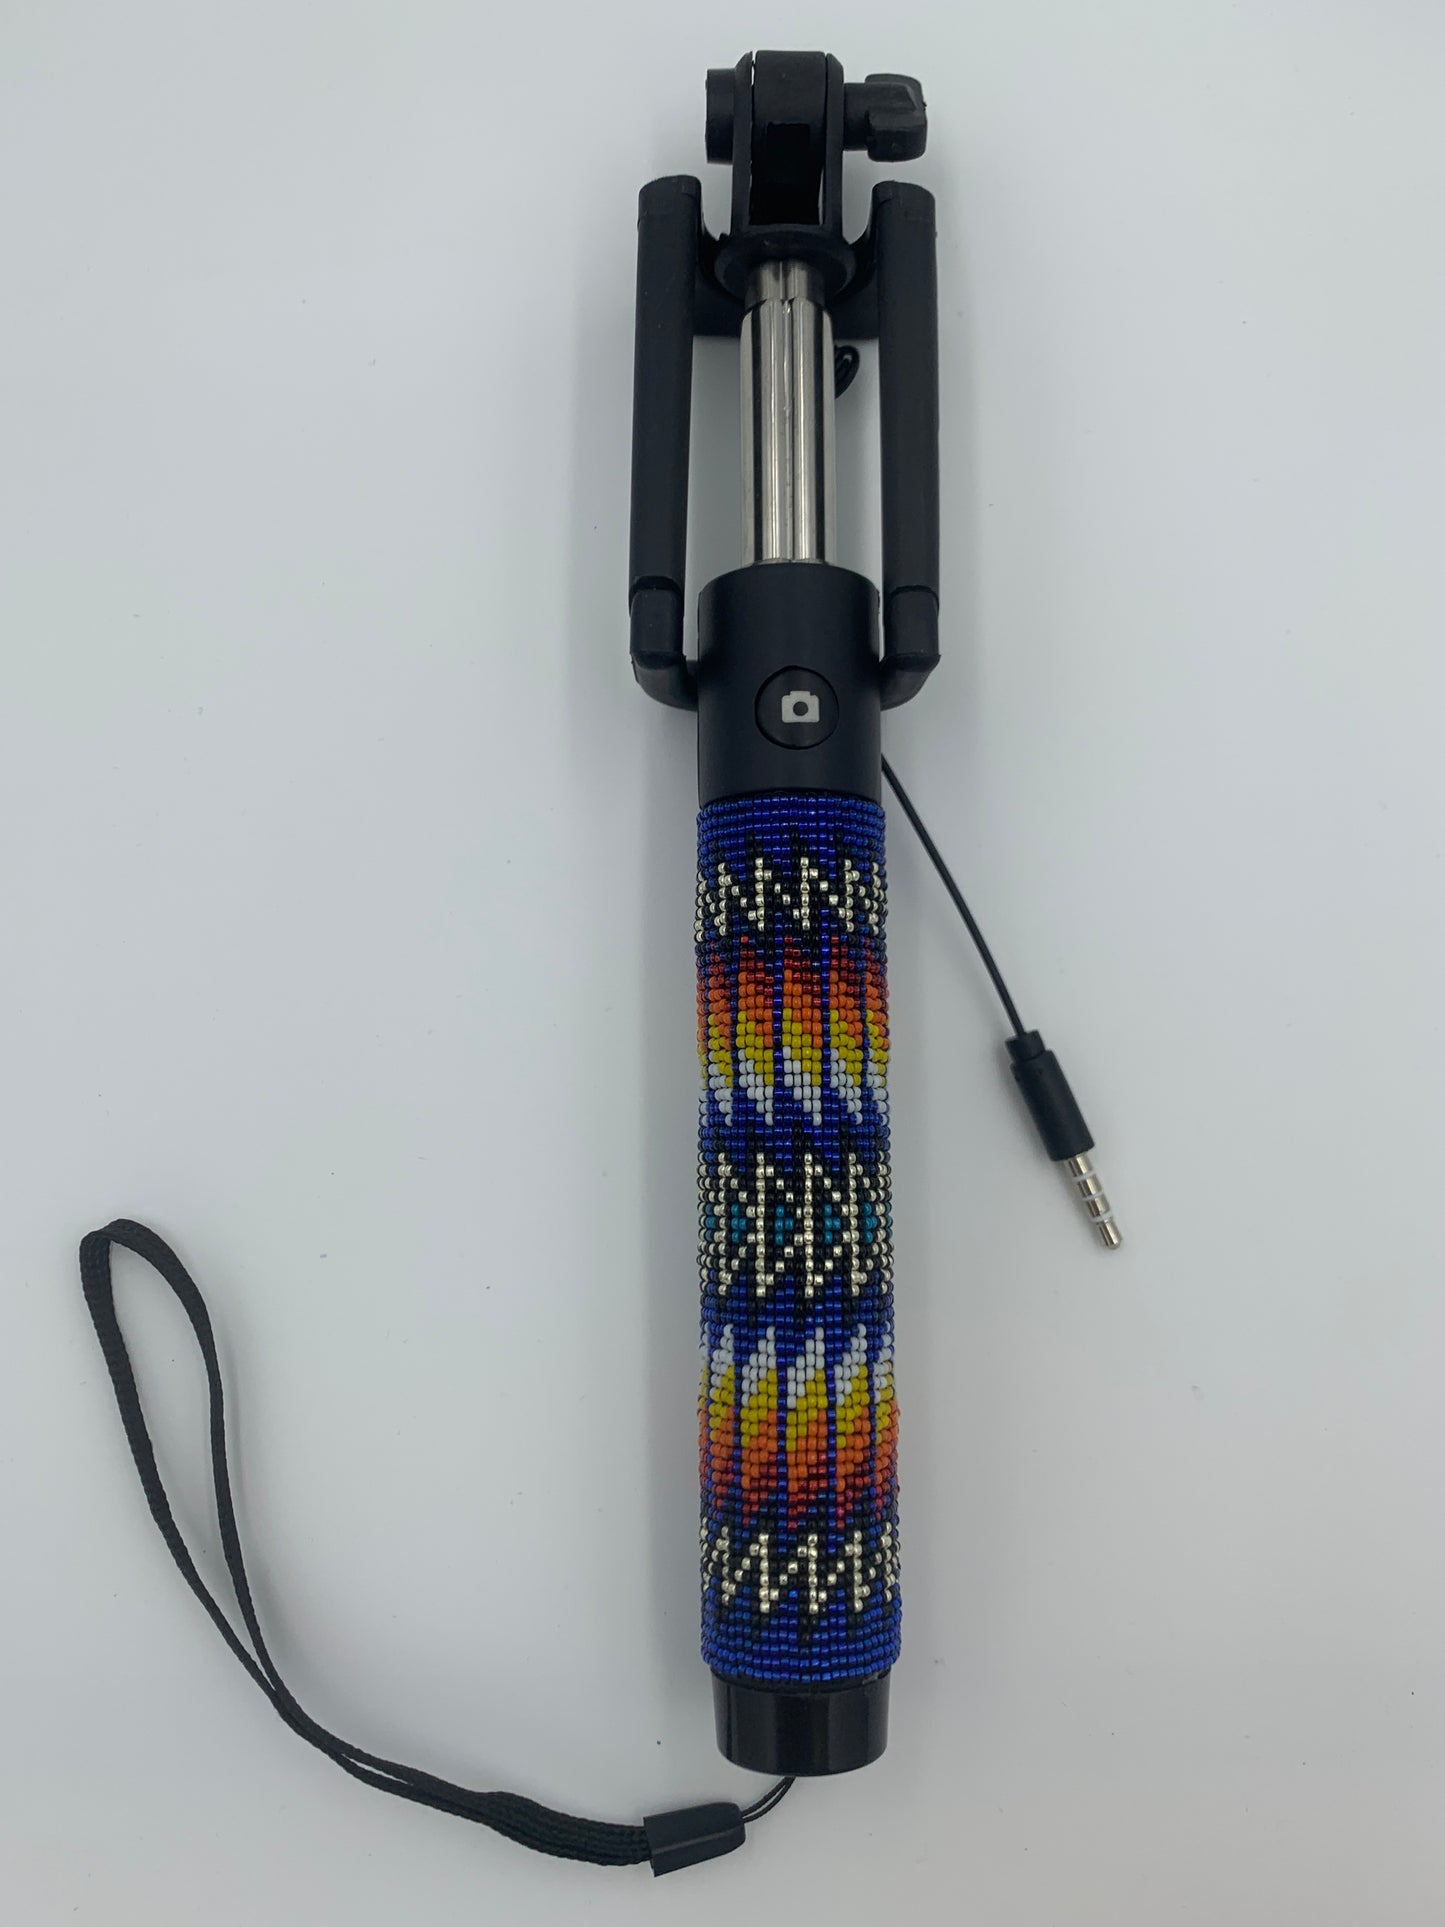 Dwight Nathaniel Beaded Handle Wired Selfie Stick #1